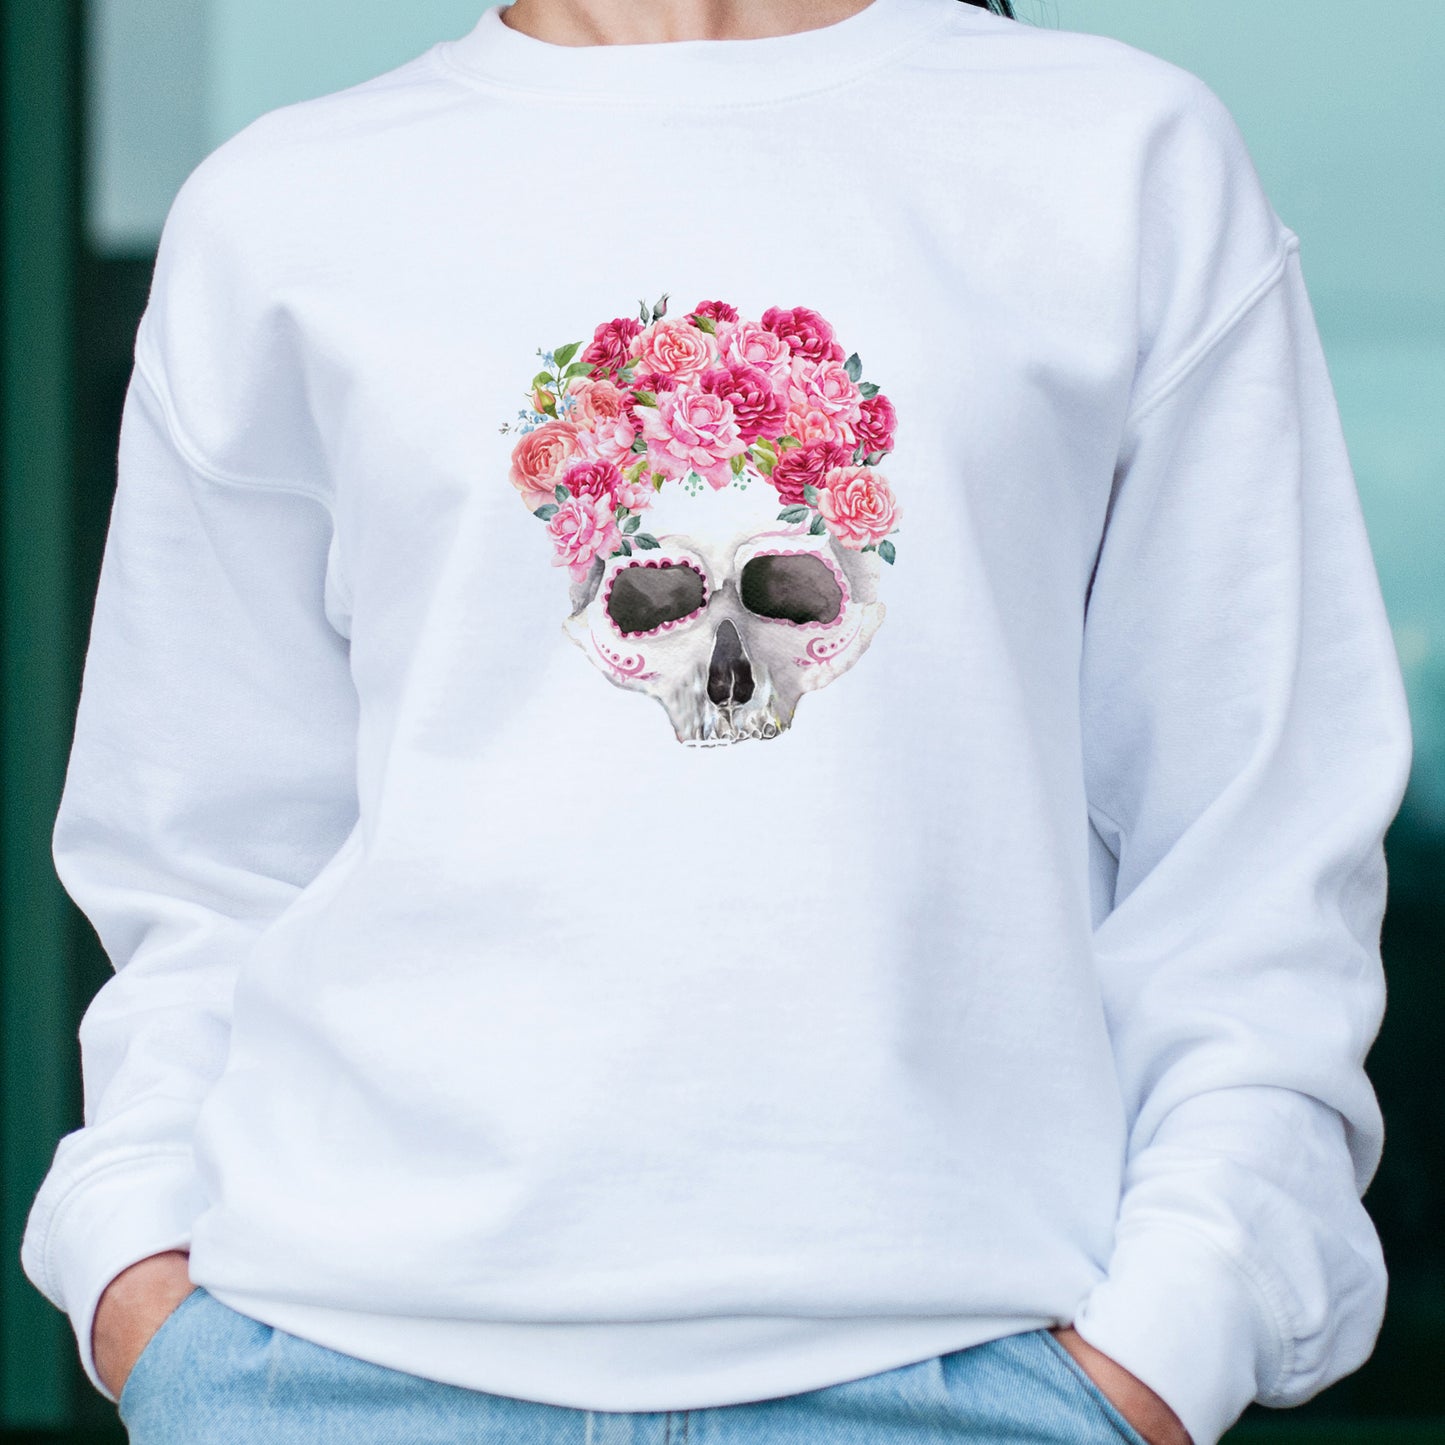 Pink flower skull design for Rocket mum white sweatshirt paired with jeans